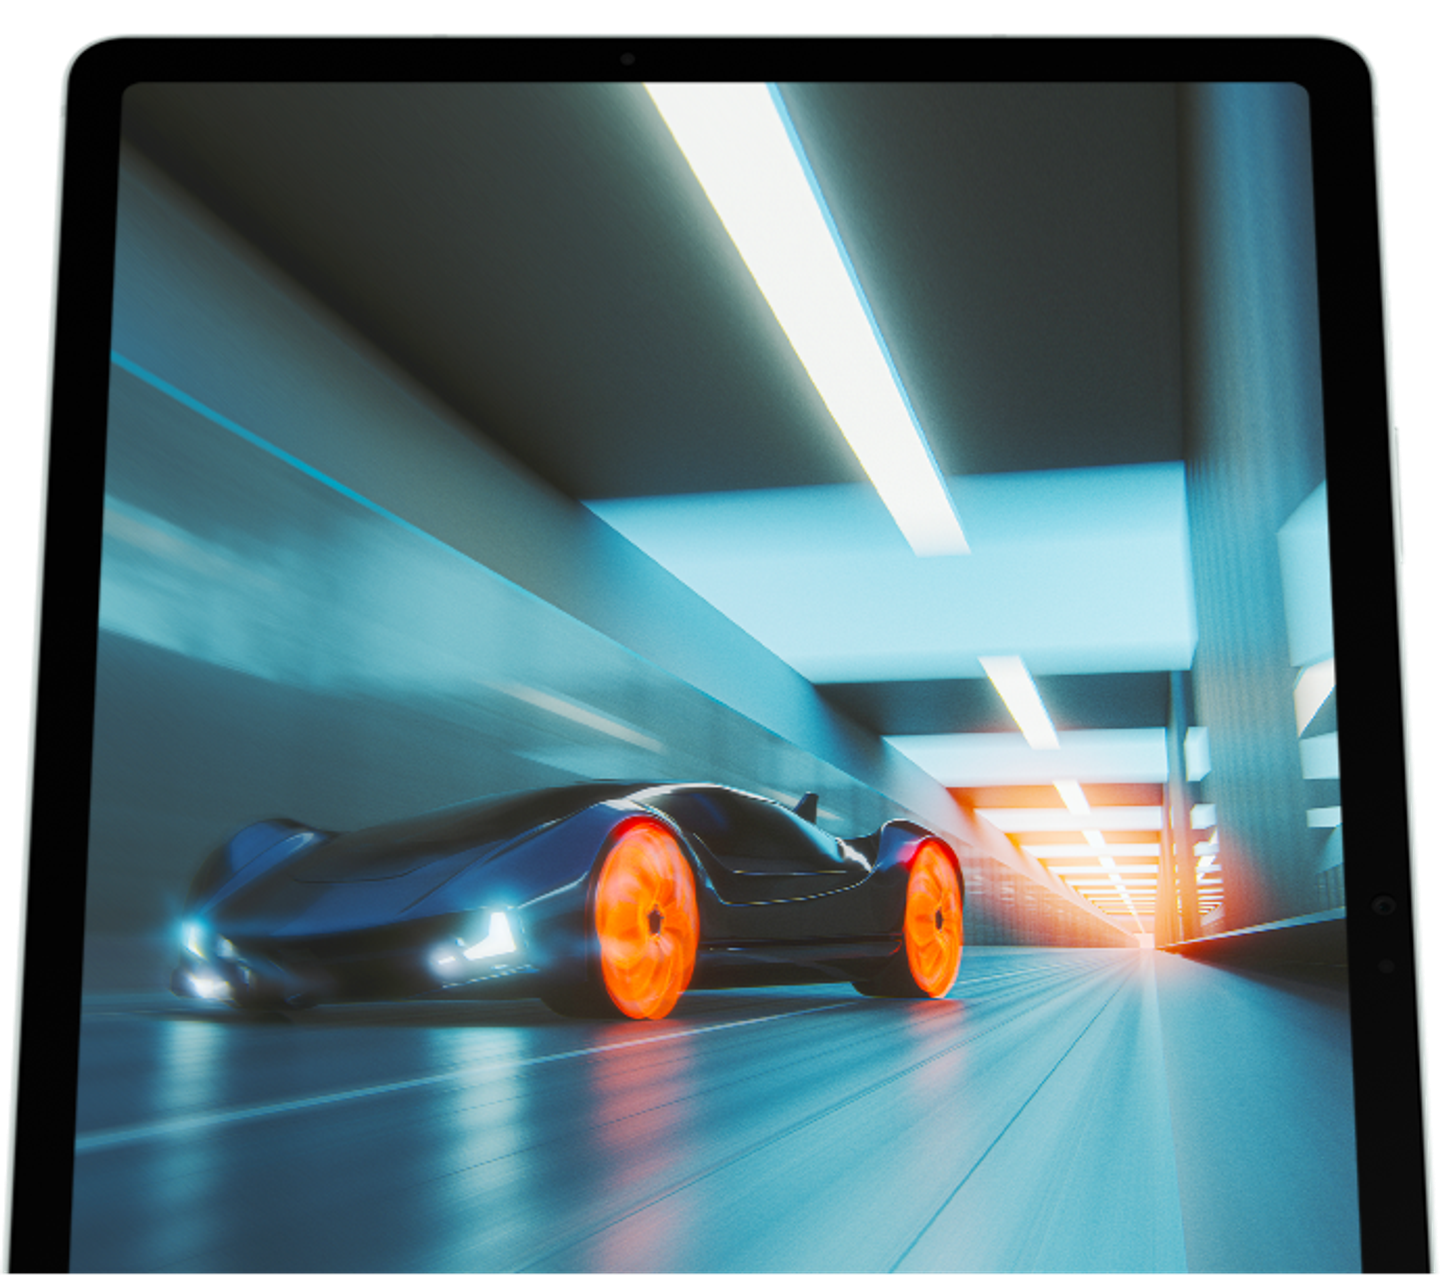 image galaxy tablet having on screen a car racing in tunnel going in high speeds.